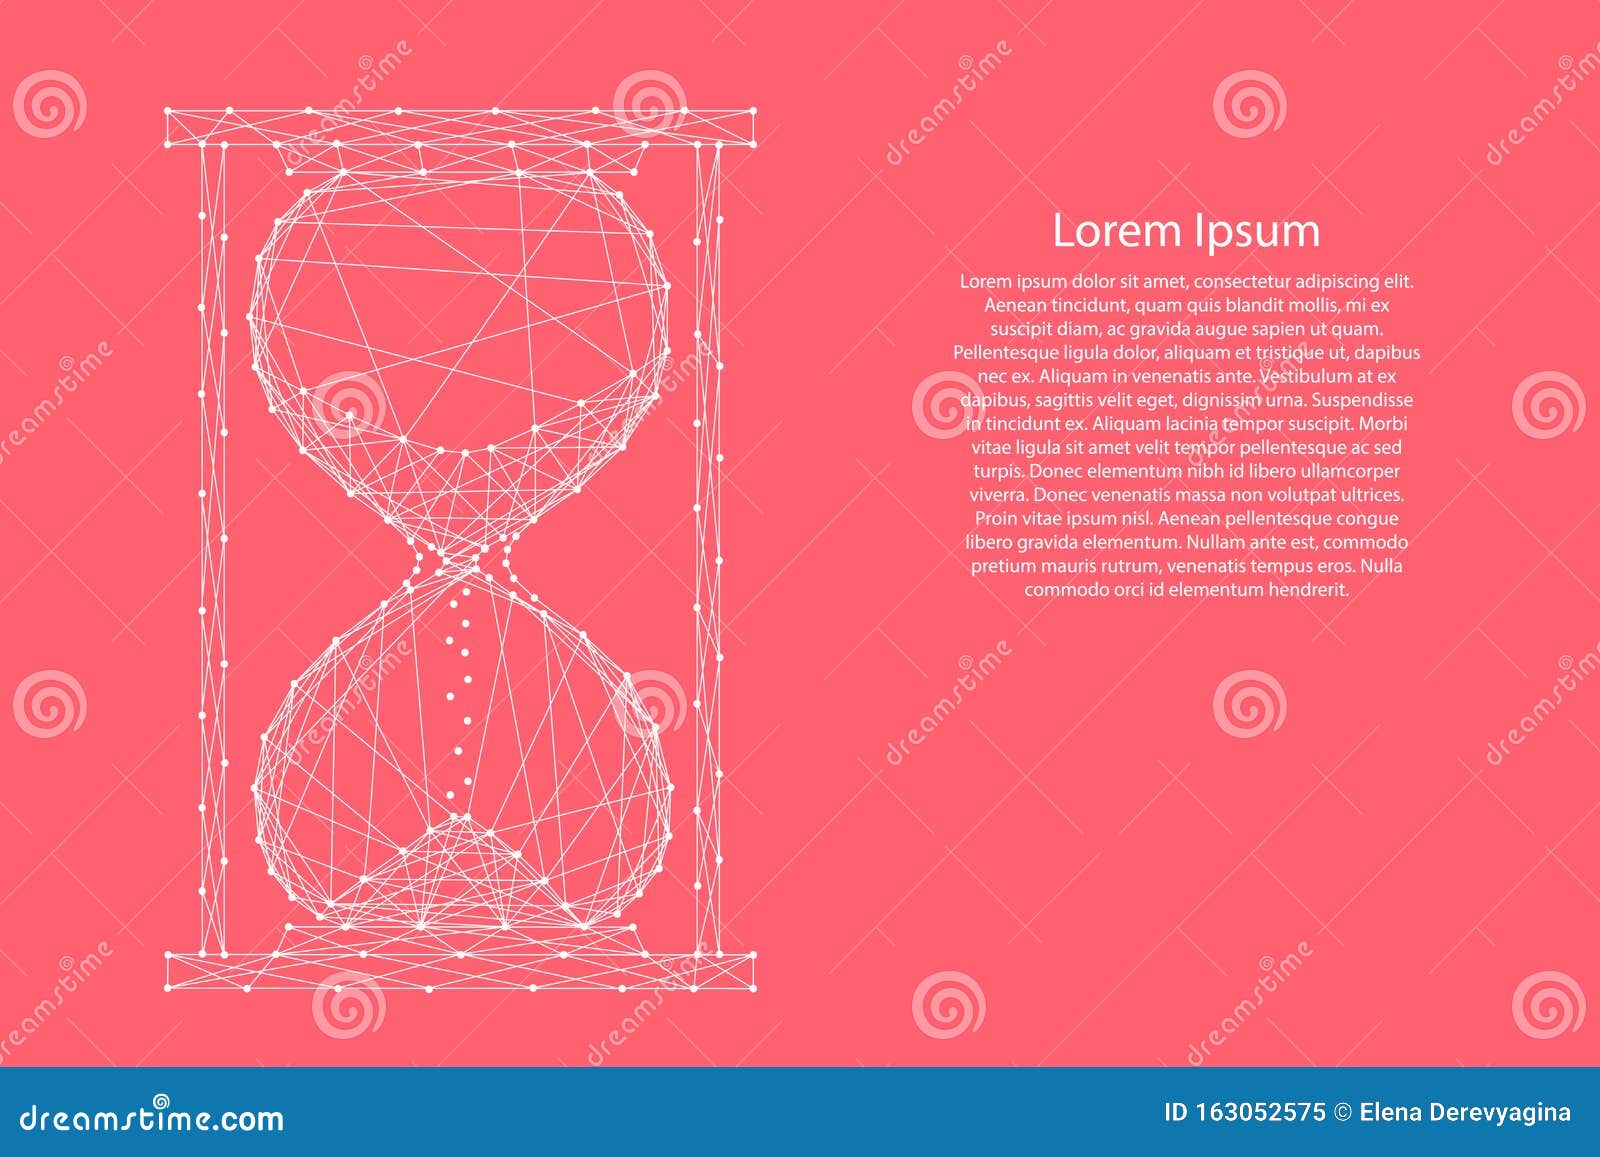 hourglass falling sand from abstract futuristic polygonal white lines and dots on pink rose color coral background for banner,